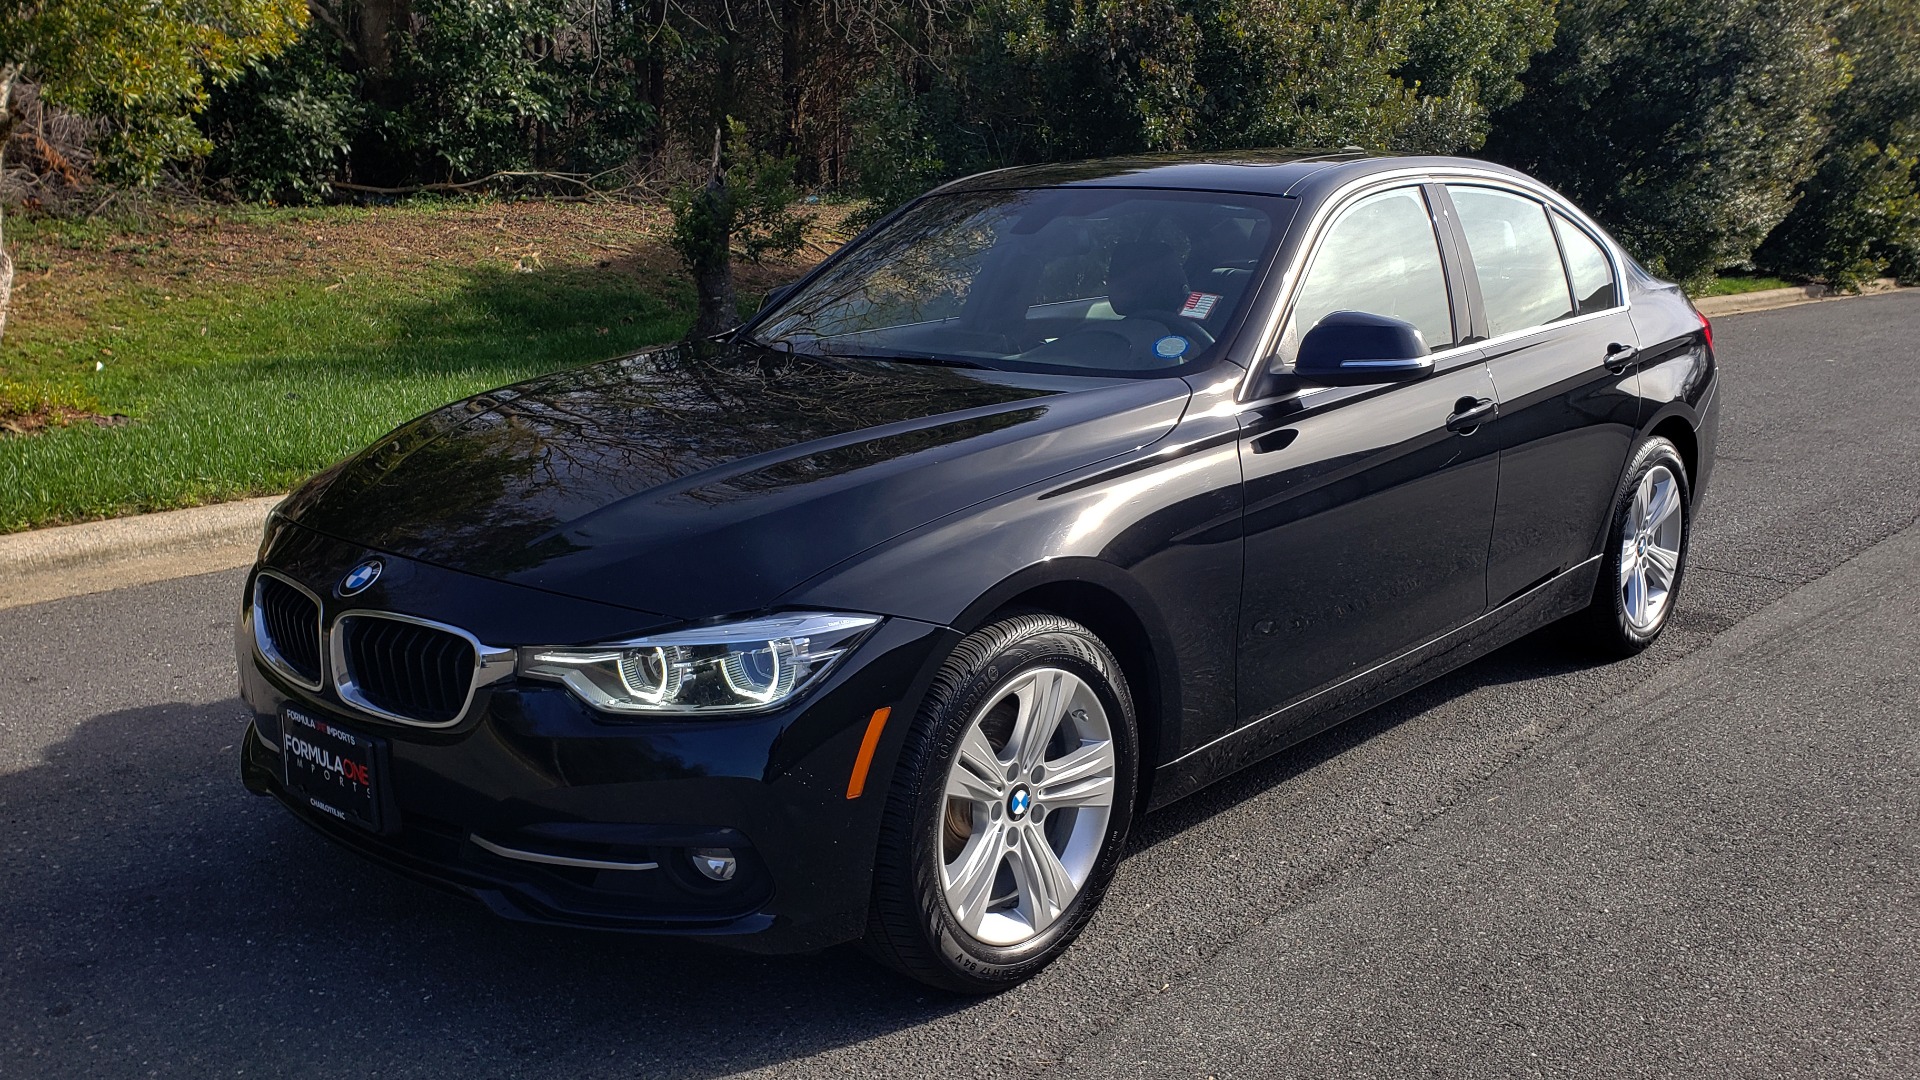 Used 2018 BMW 3 SERIES 330I XDRIVE / CONV PKG / NAV / HTD STS / SUNROOF / REARVIEW for sale Sold at Formula Imports in Charlotte NC 28227 1